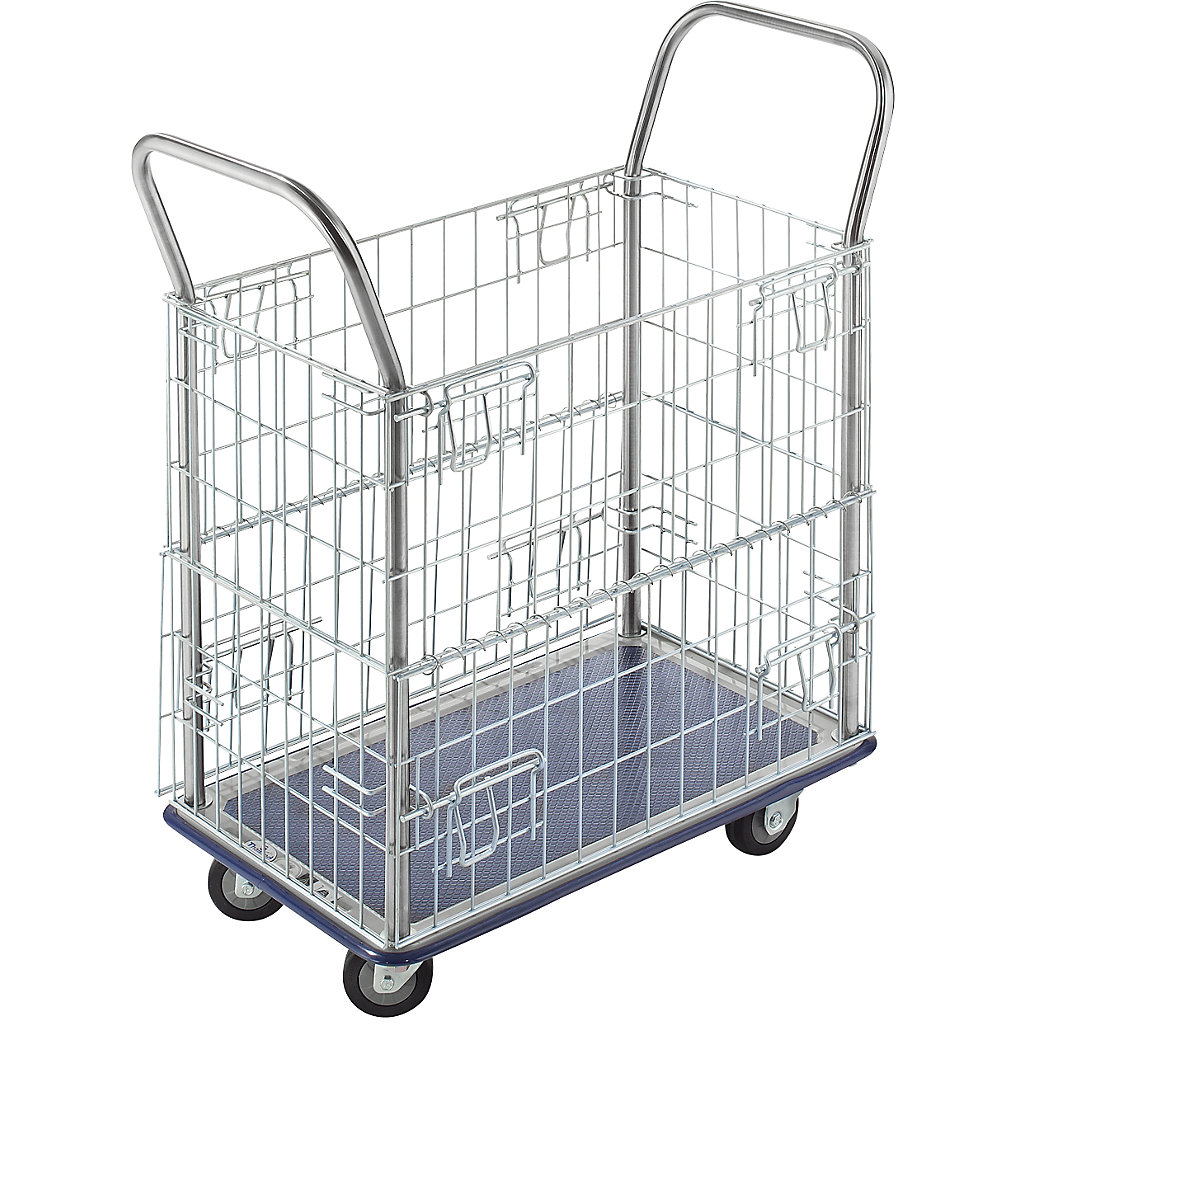 Mesh trolley, zinc plated mesh sides, with stainless steel push handles, max. load 220 kg, 5+ items-3